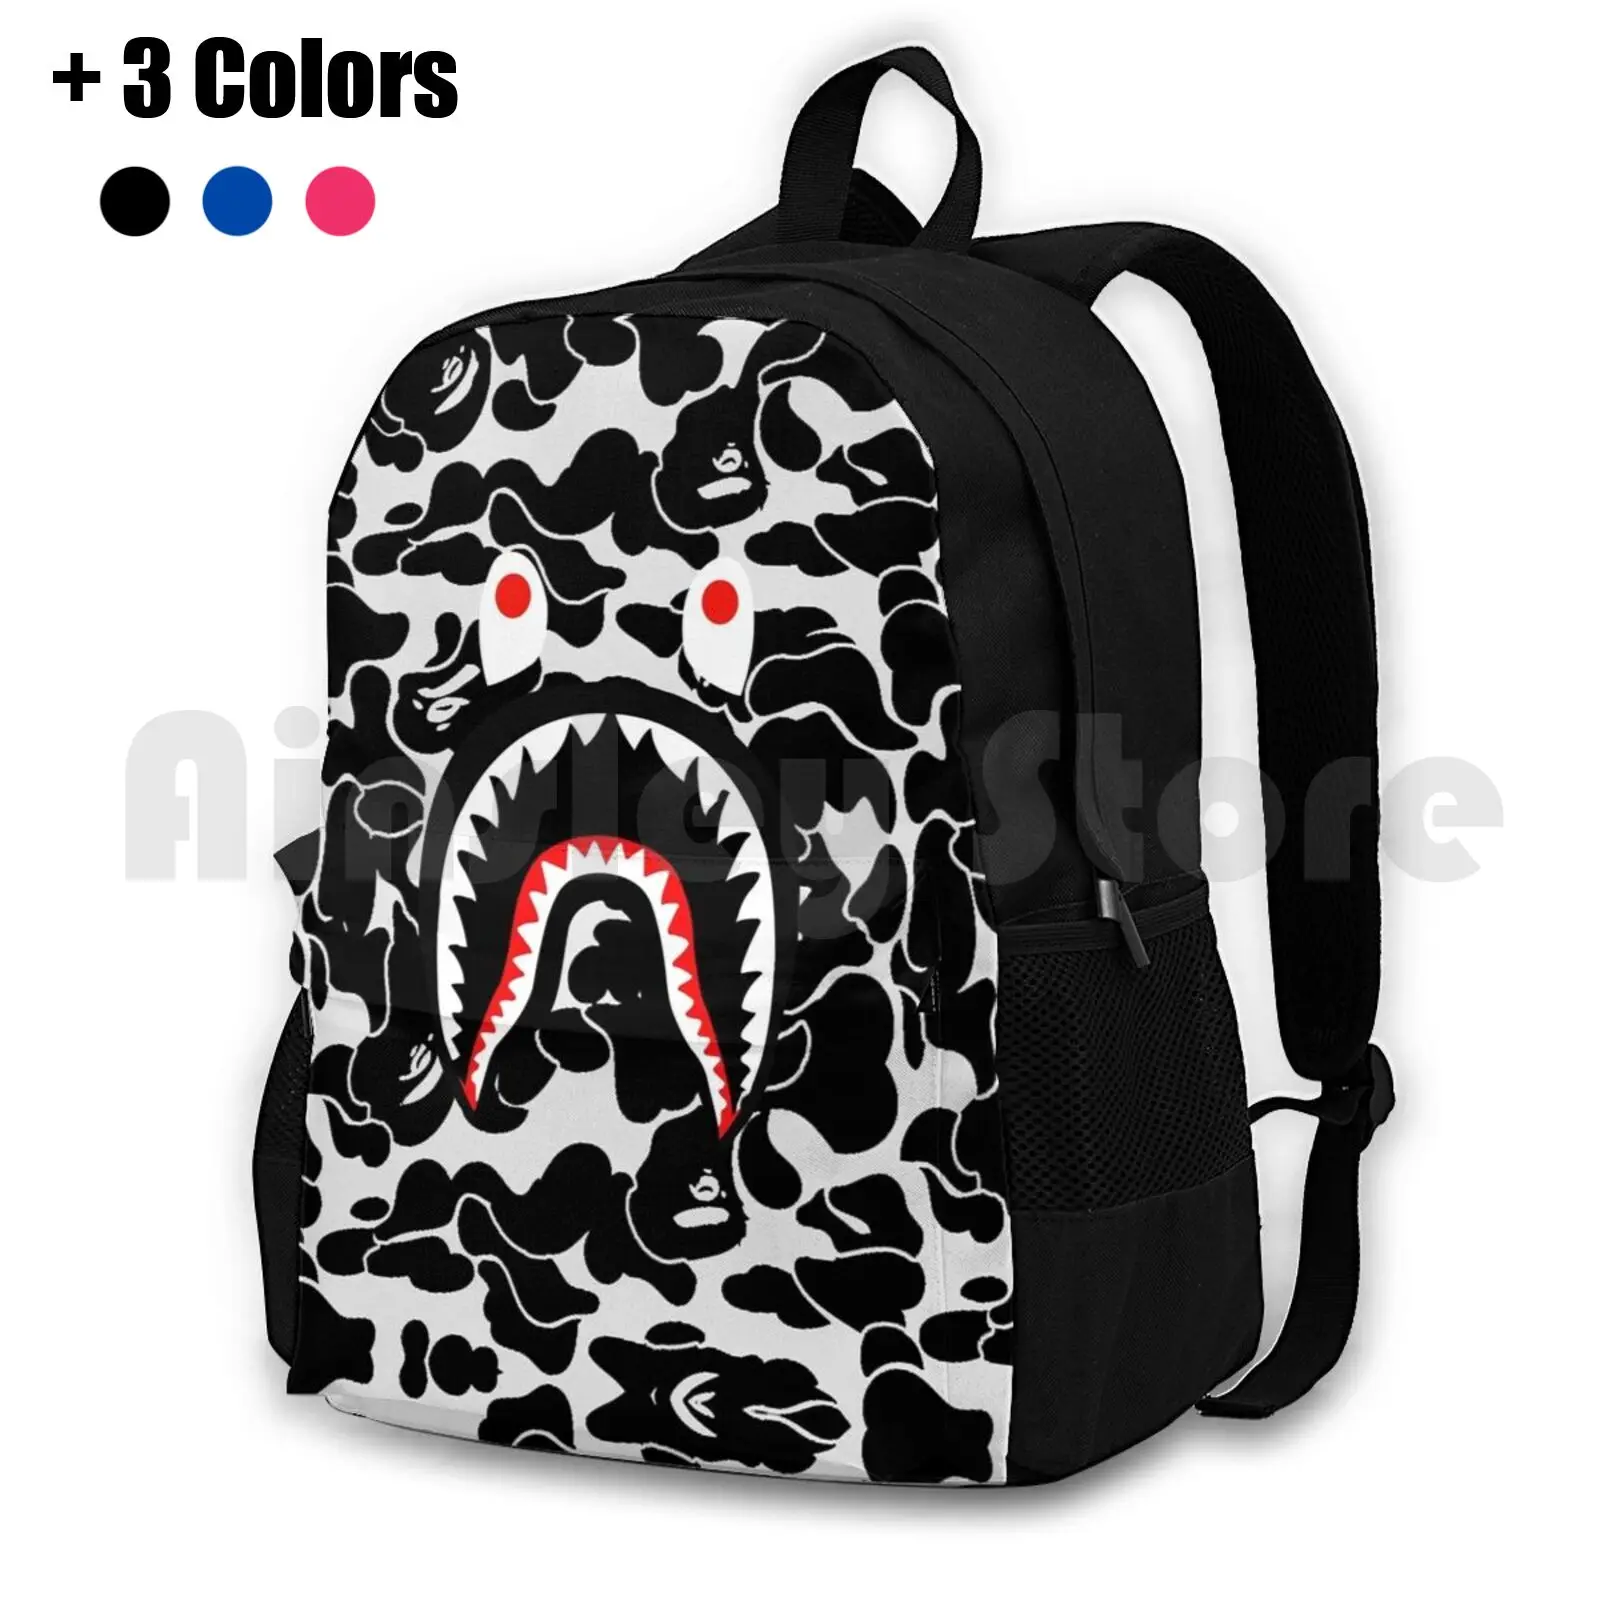 Black Shark Army Outdoor Hiking Backpack Waterproof Camping Travel Shark Black Army Shark Black Army Shark Black Army Camo Best